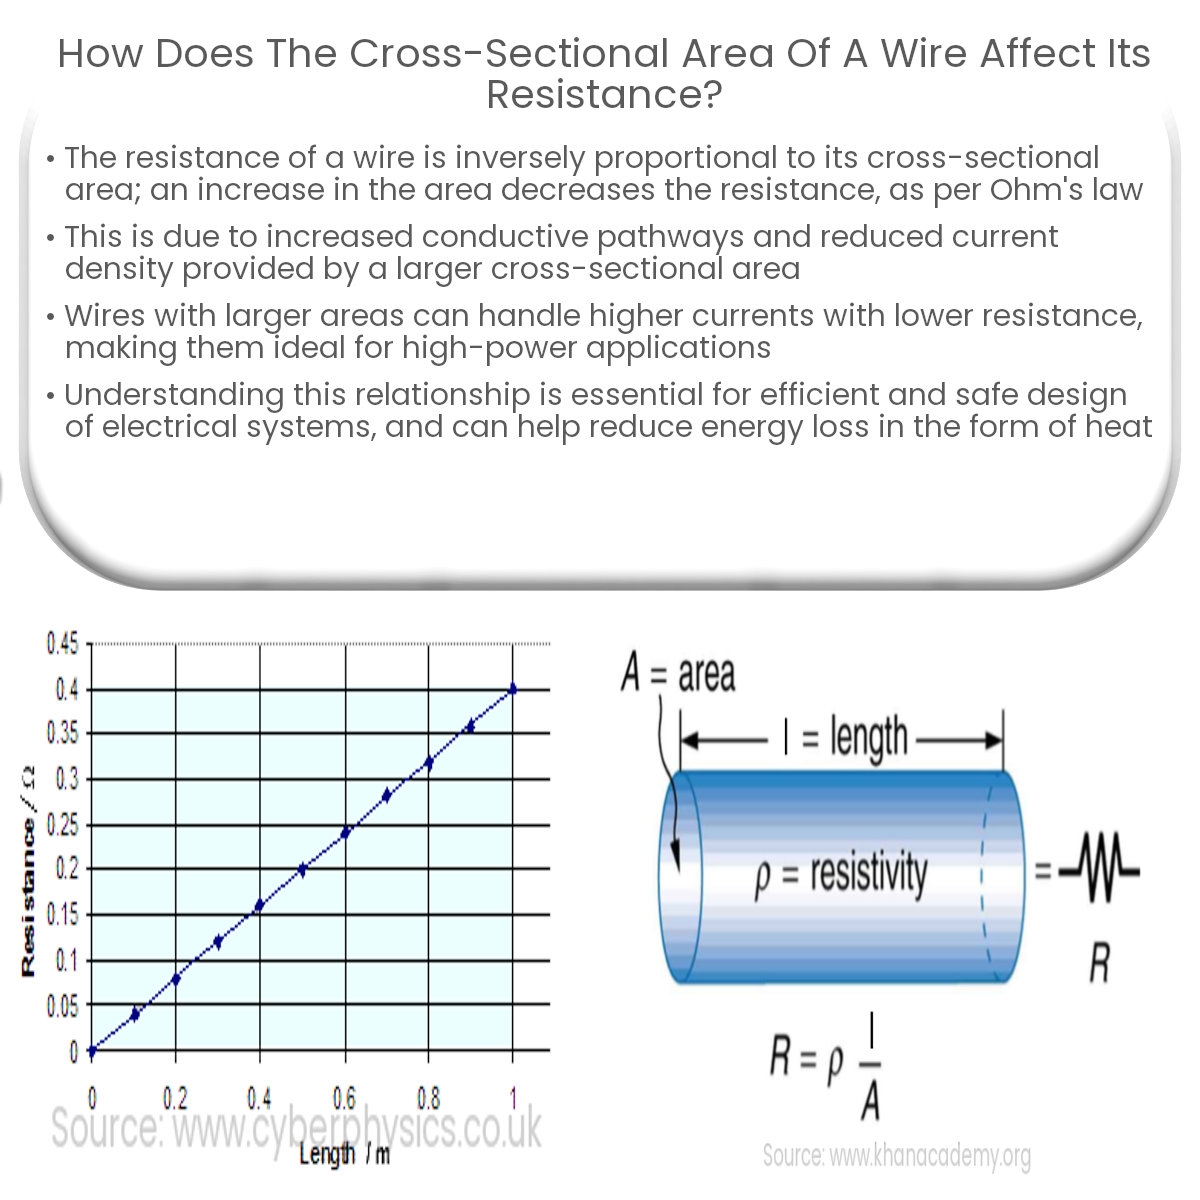 How does the cross-sectional area of a wire affect its resistance?